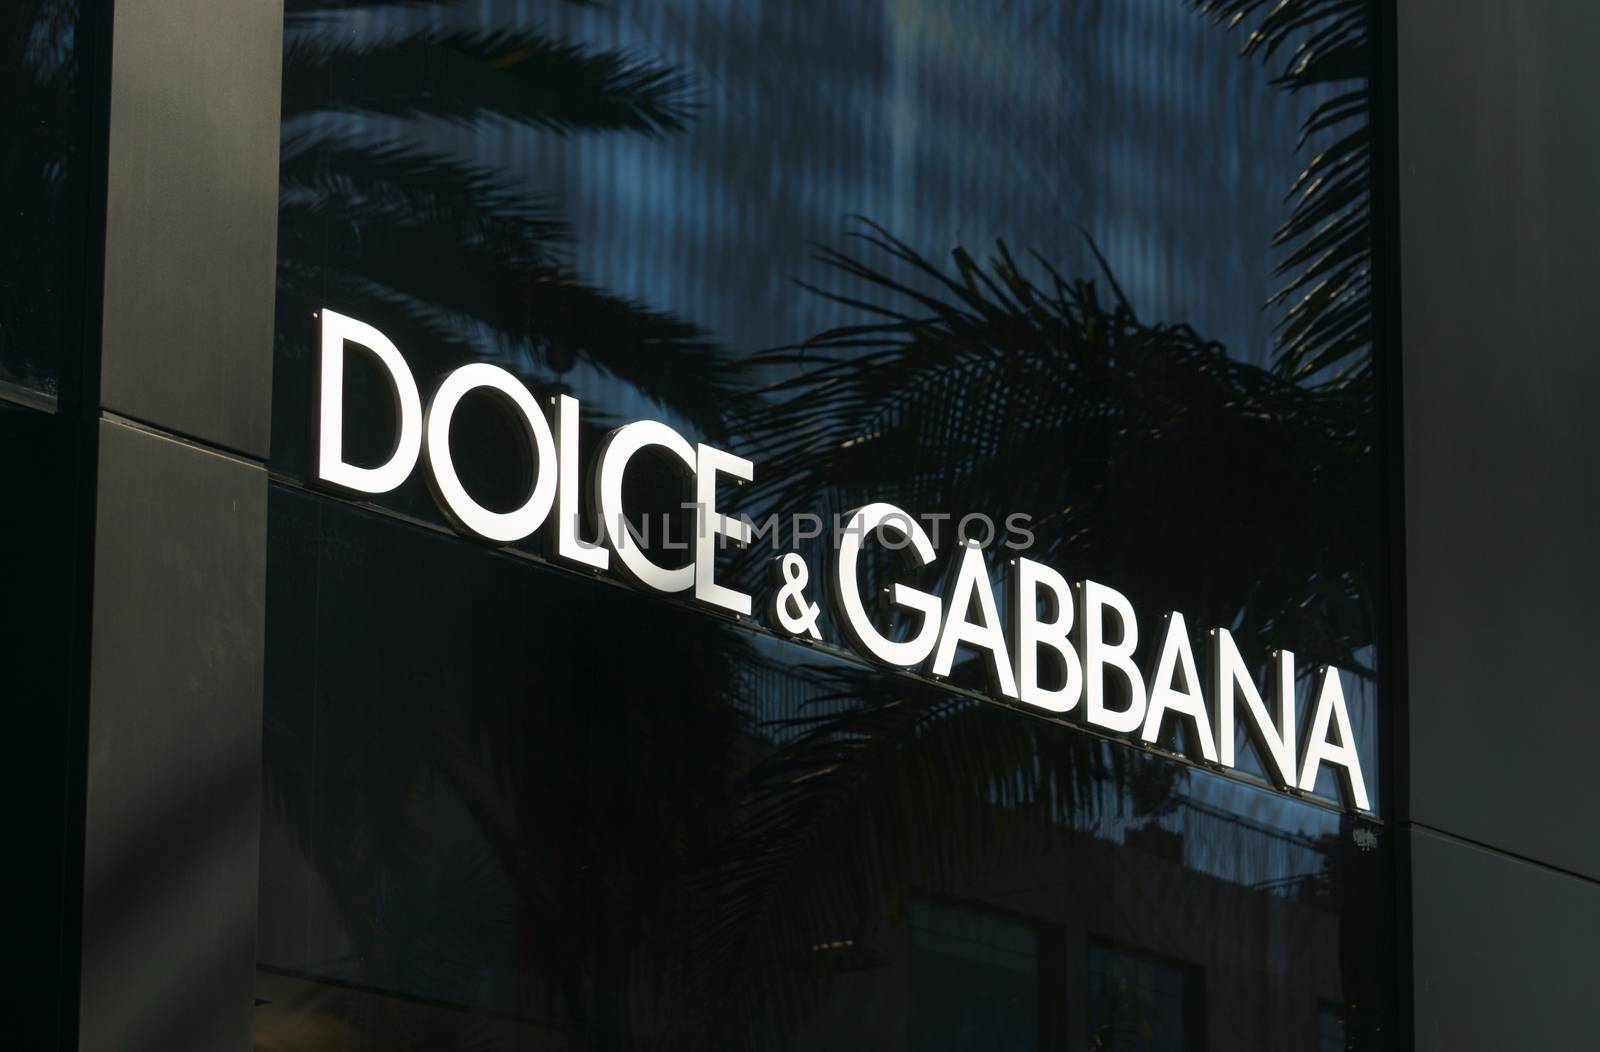 BEVERLY HILLS, CA/USA - JANUARY 3, 2015: Dolce & Gabbana retail store exterior. Dolce & Gabbana is an Italian luxury industry fashion house.